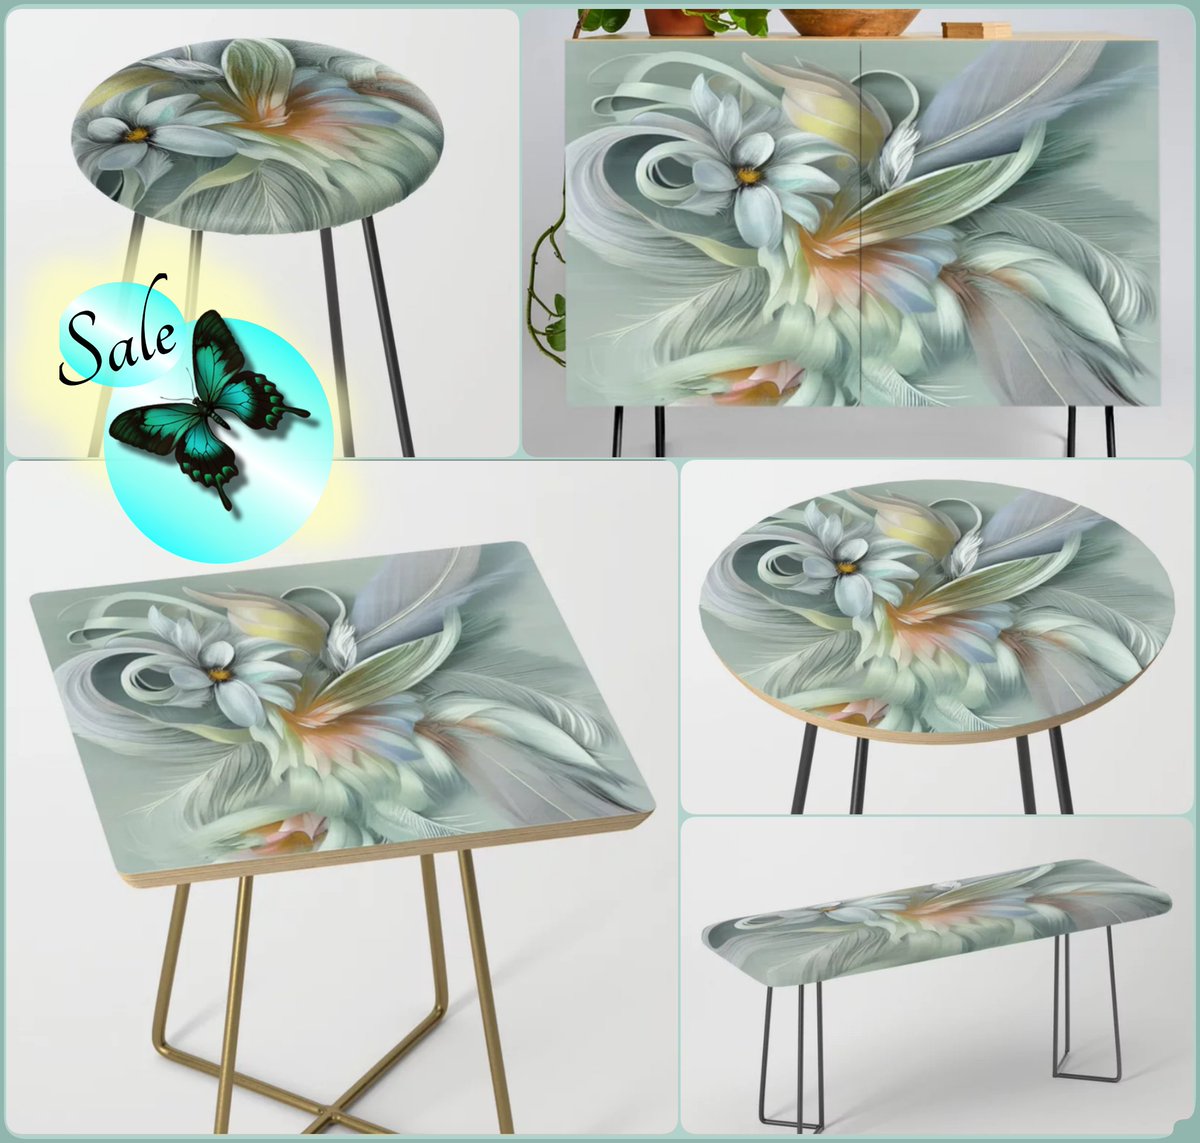 *Sale 10% Off*
Secluded Moments Side Table~by Art Falaxy
~Unique Home Decor~ #artfalaxy #art #furniture #tables #homedecor #society6 #modern #Society6max #accents #interior #trendy #credenza #dressers #stools #coffee

society6.com/product/seclud…